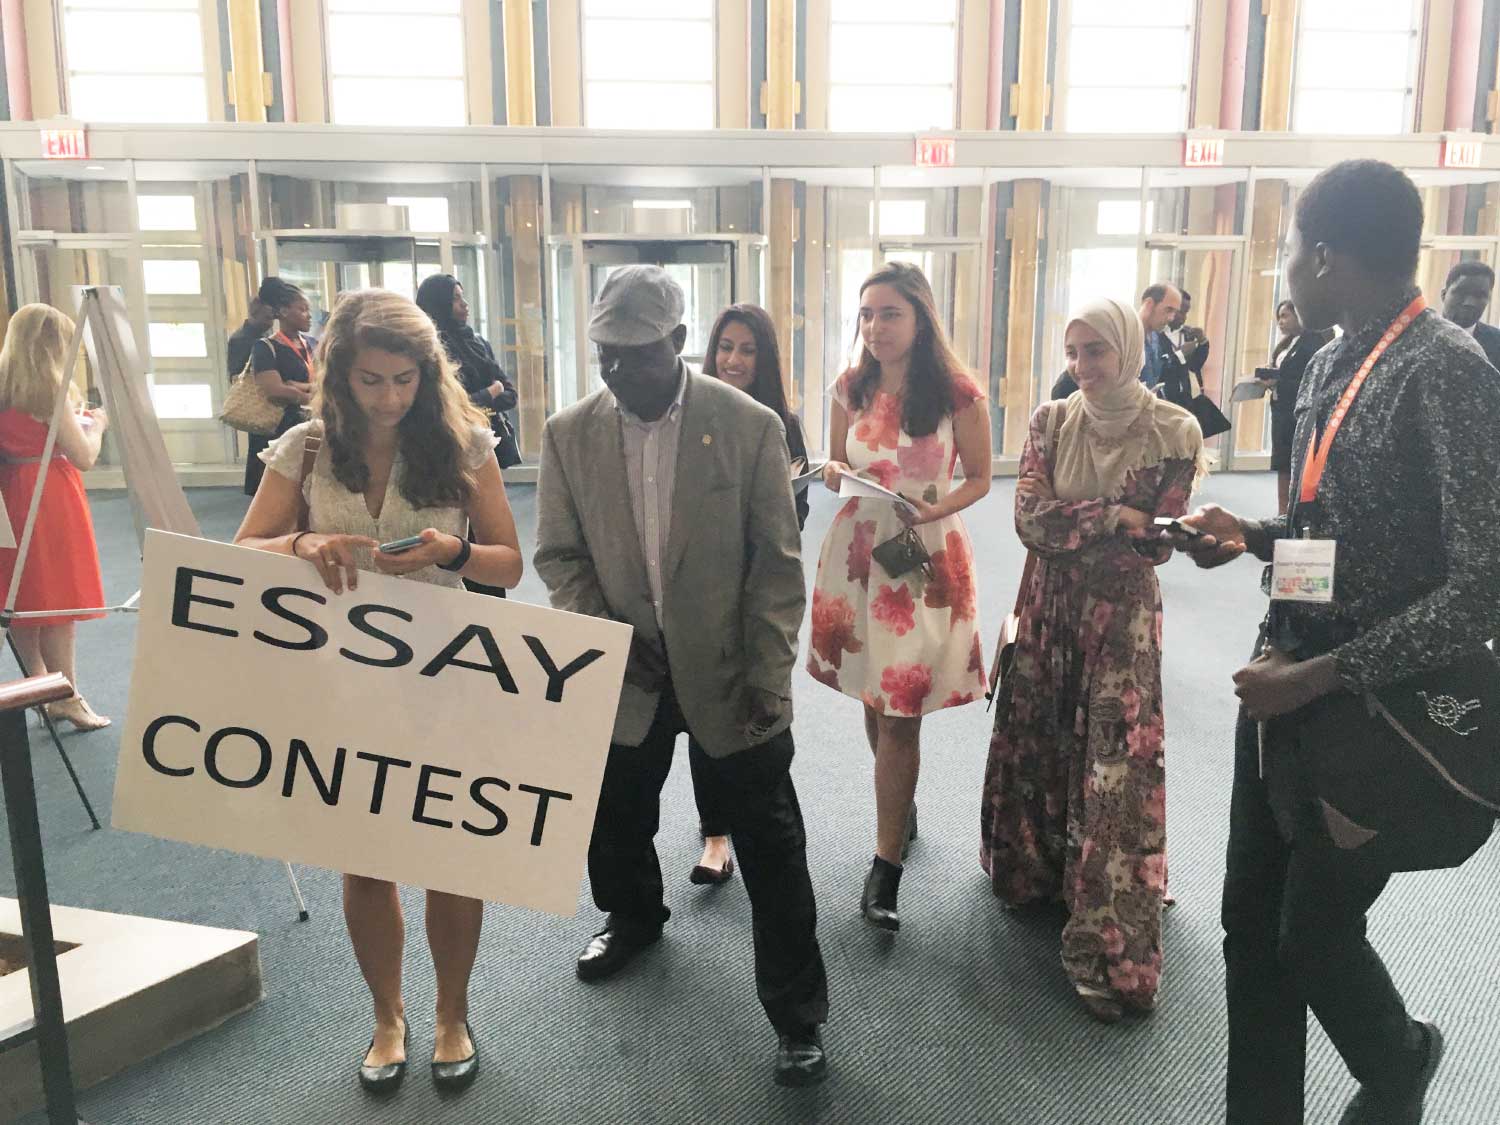 Photo: young people in lobby with Essay Contest sign